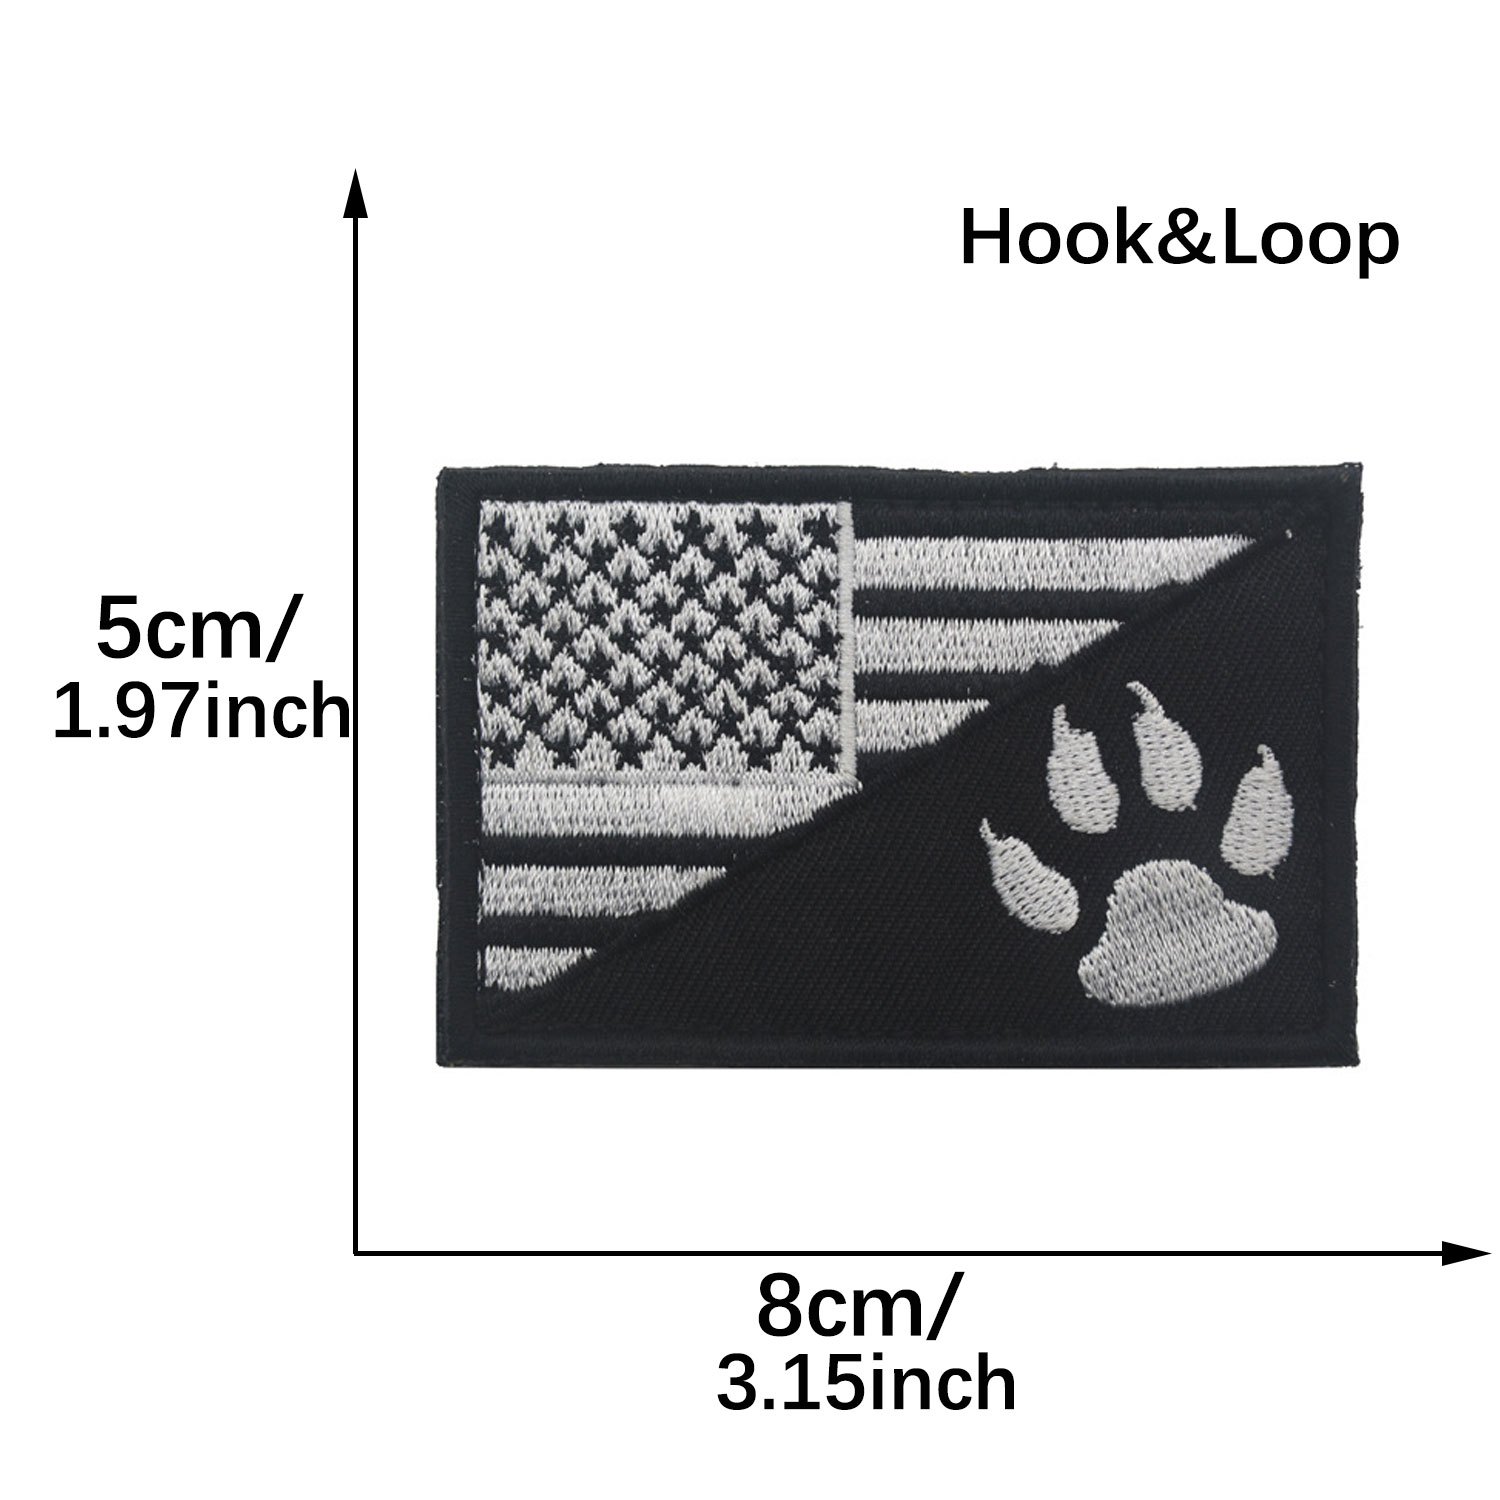 Black And White USA United States Flag Patch